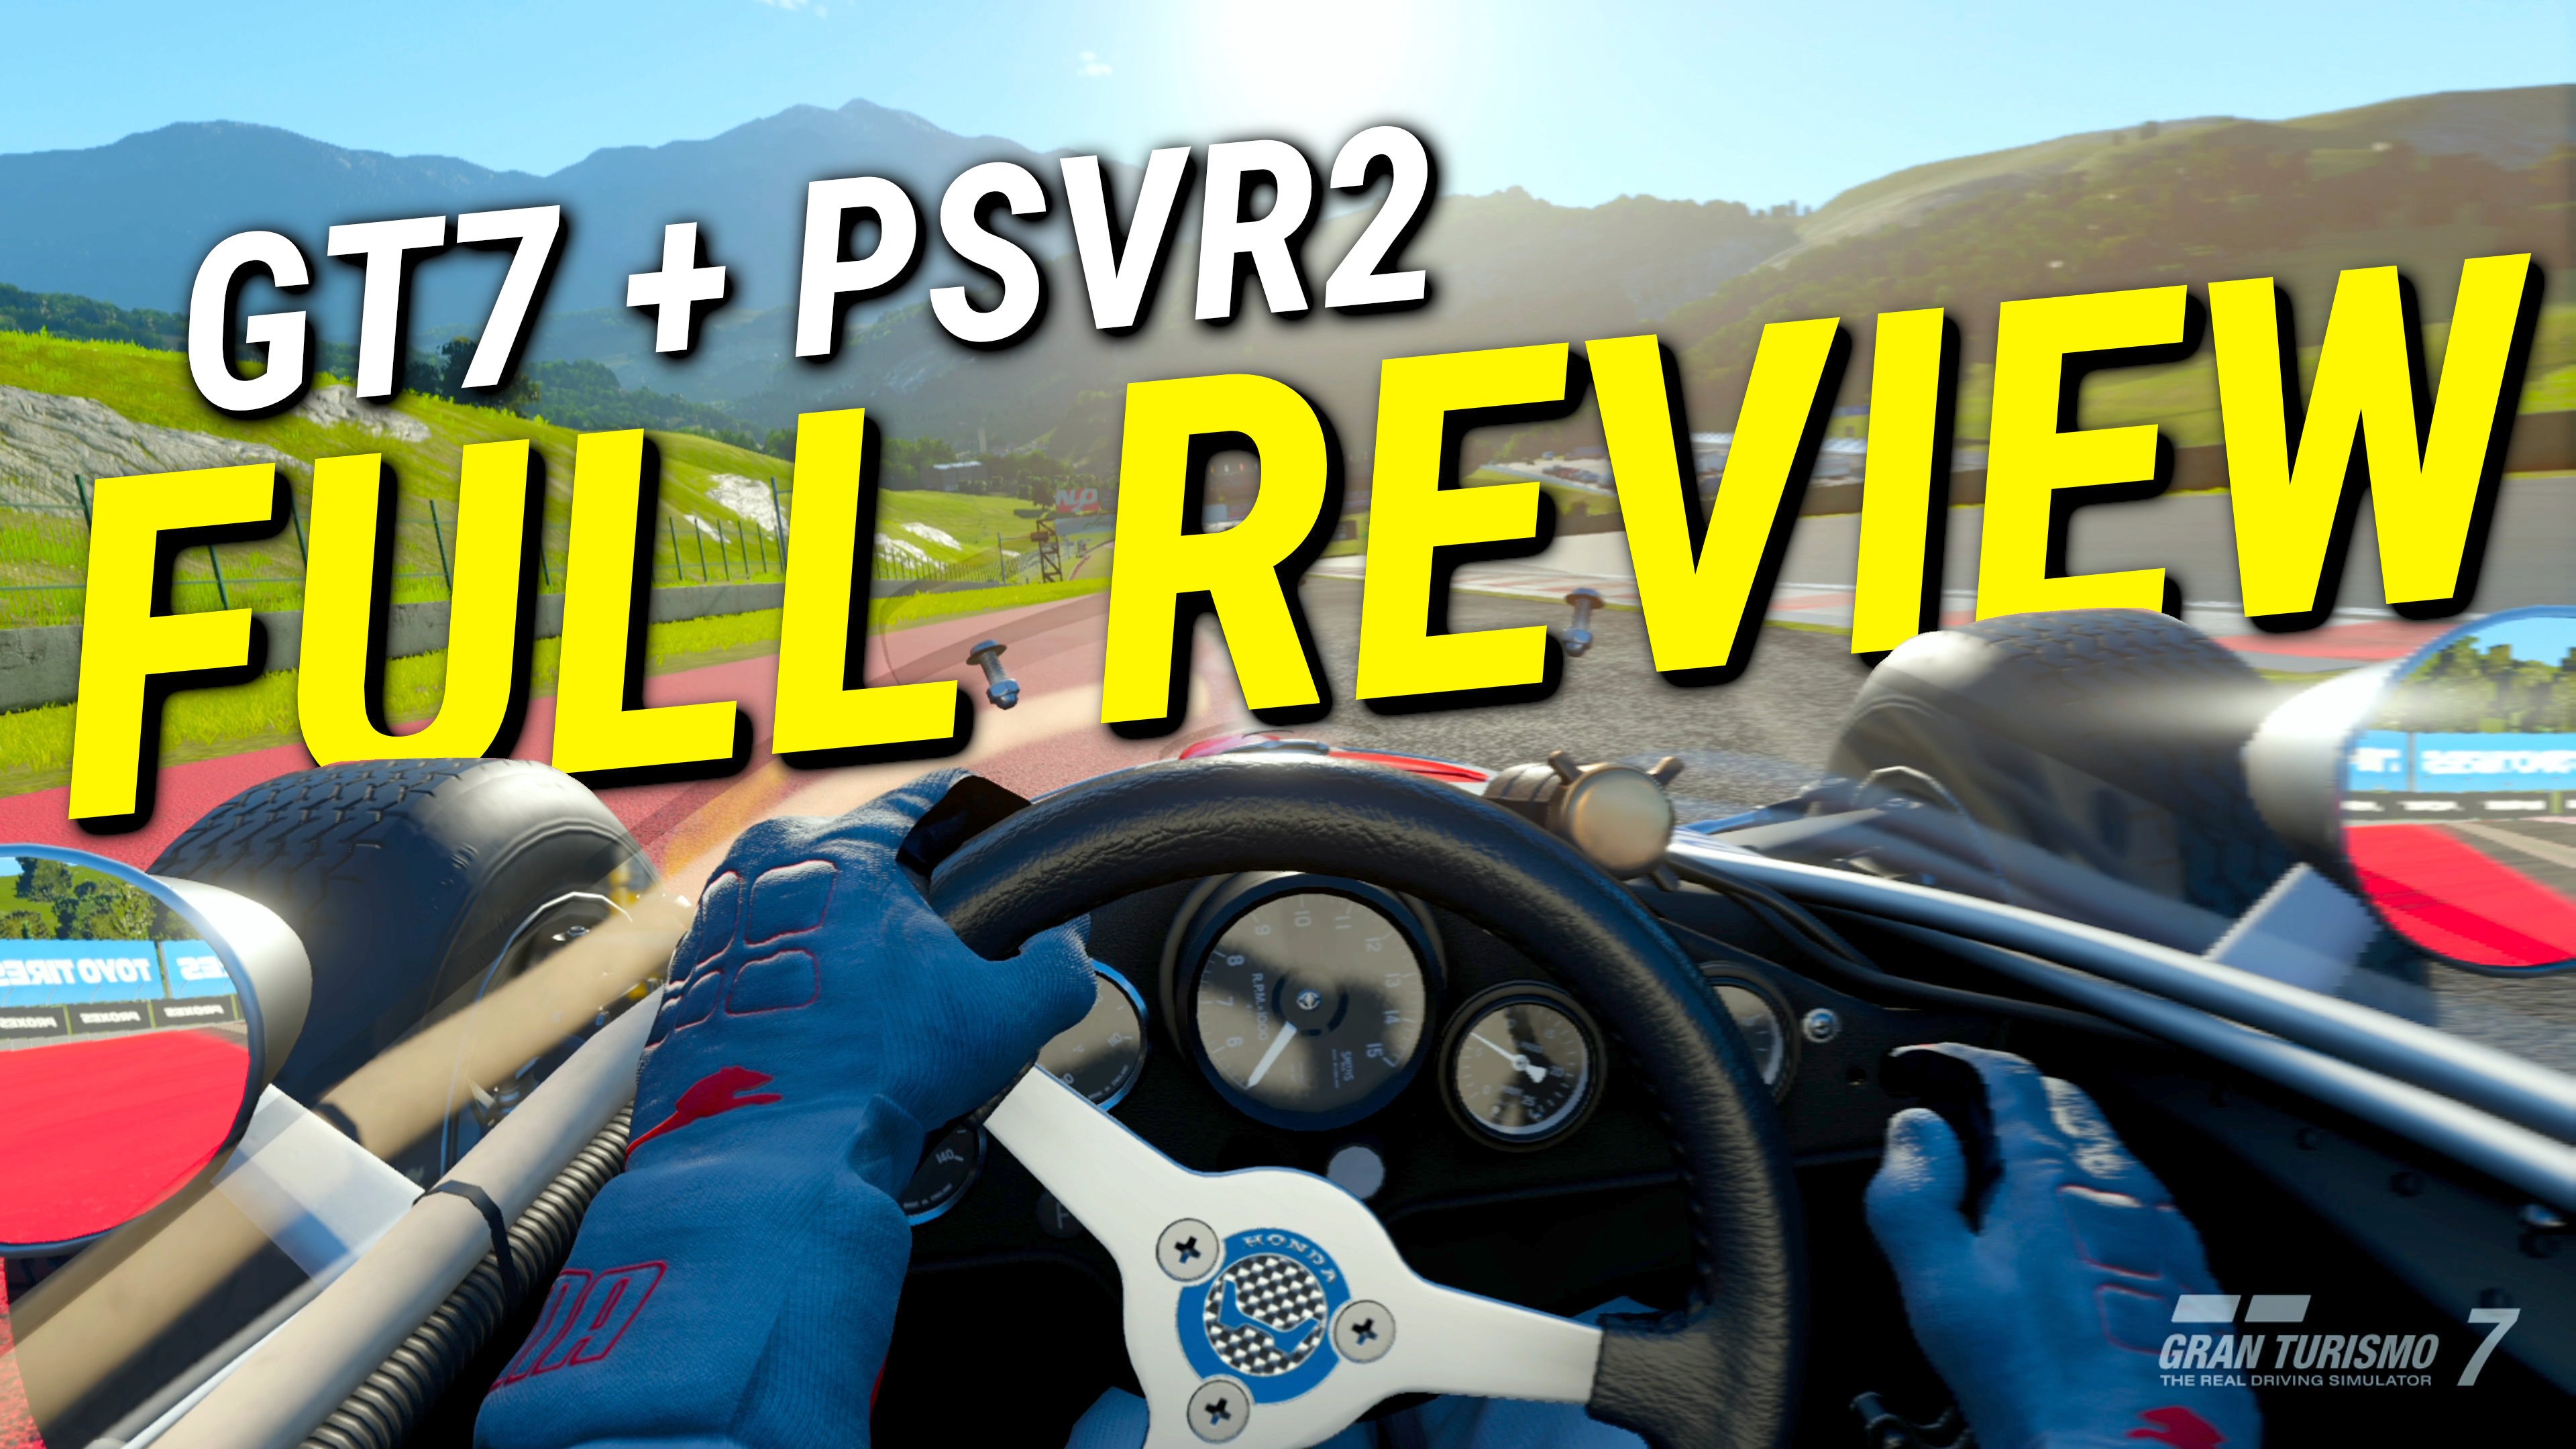 Gran Turismo 7 Revs Up for PSVR2 with a Free Update 2023 - Doccy darko